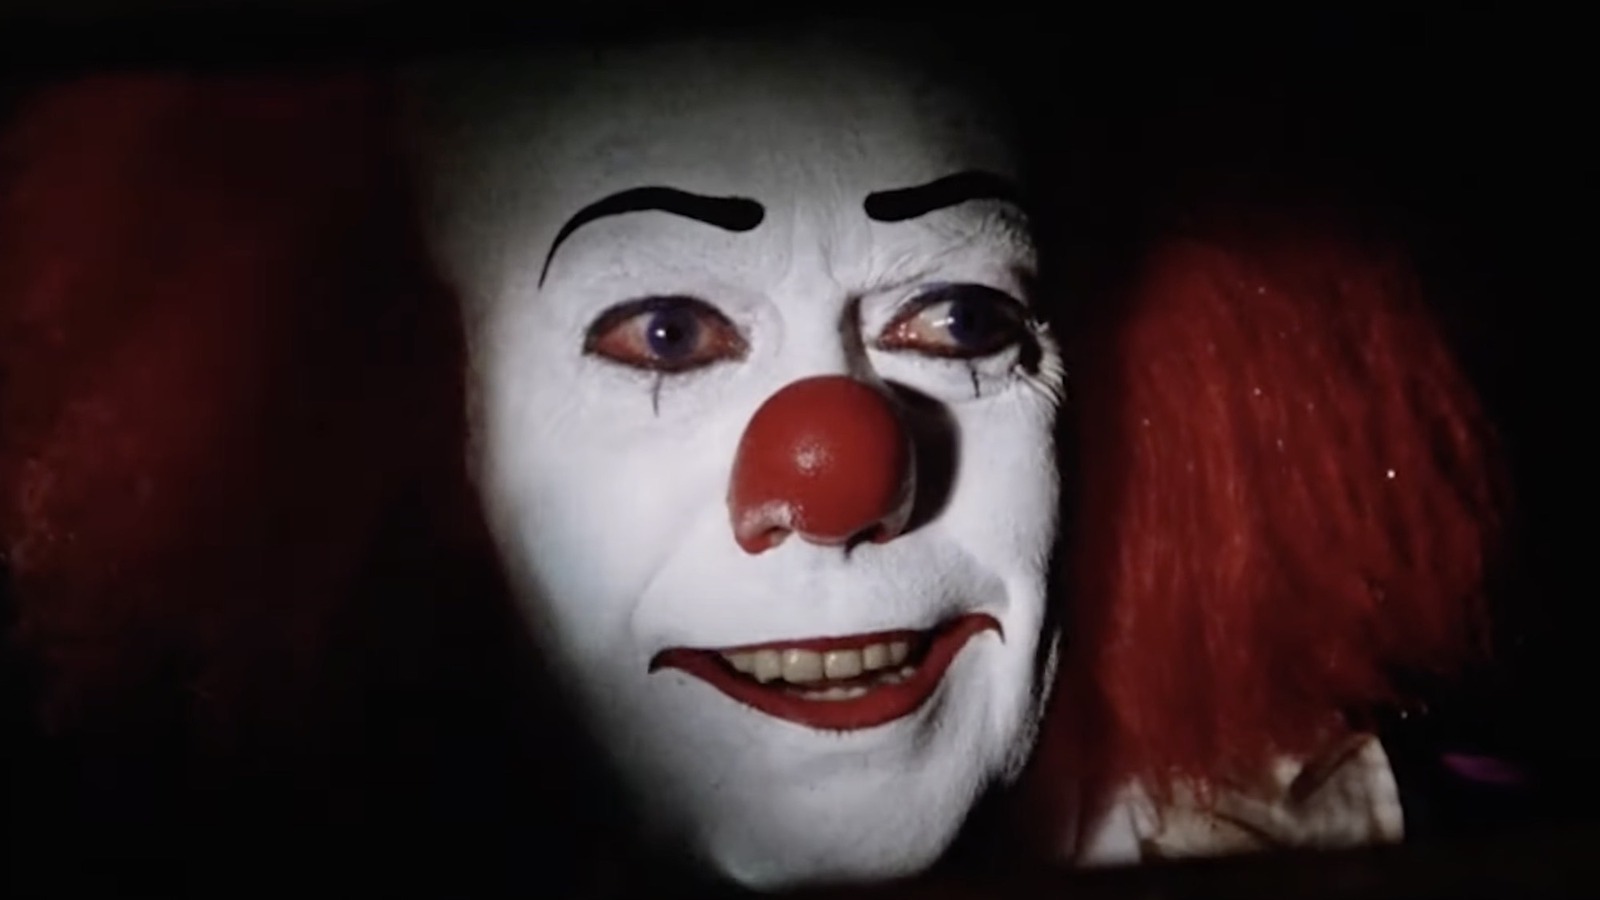 Seeing Tim Curry in a sewer on set was apparently as scary as it sounds